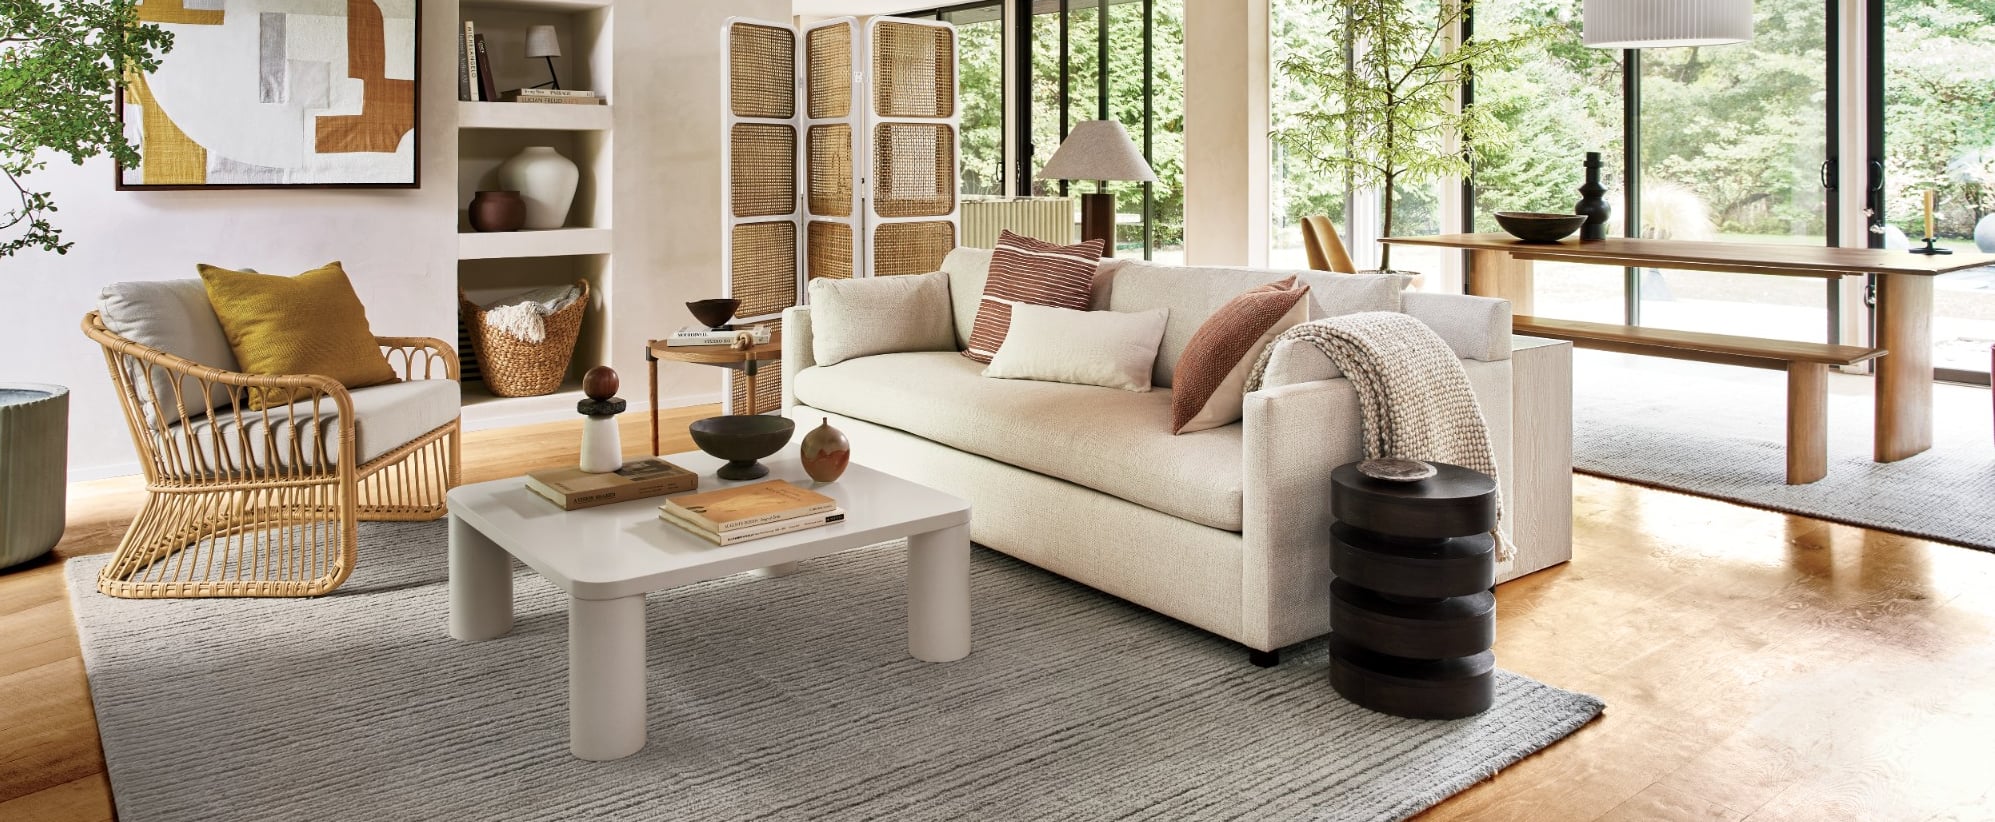 Furniture and Decor From West Elm Spring 2021 Collection 